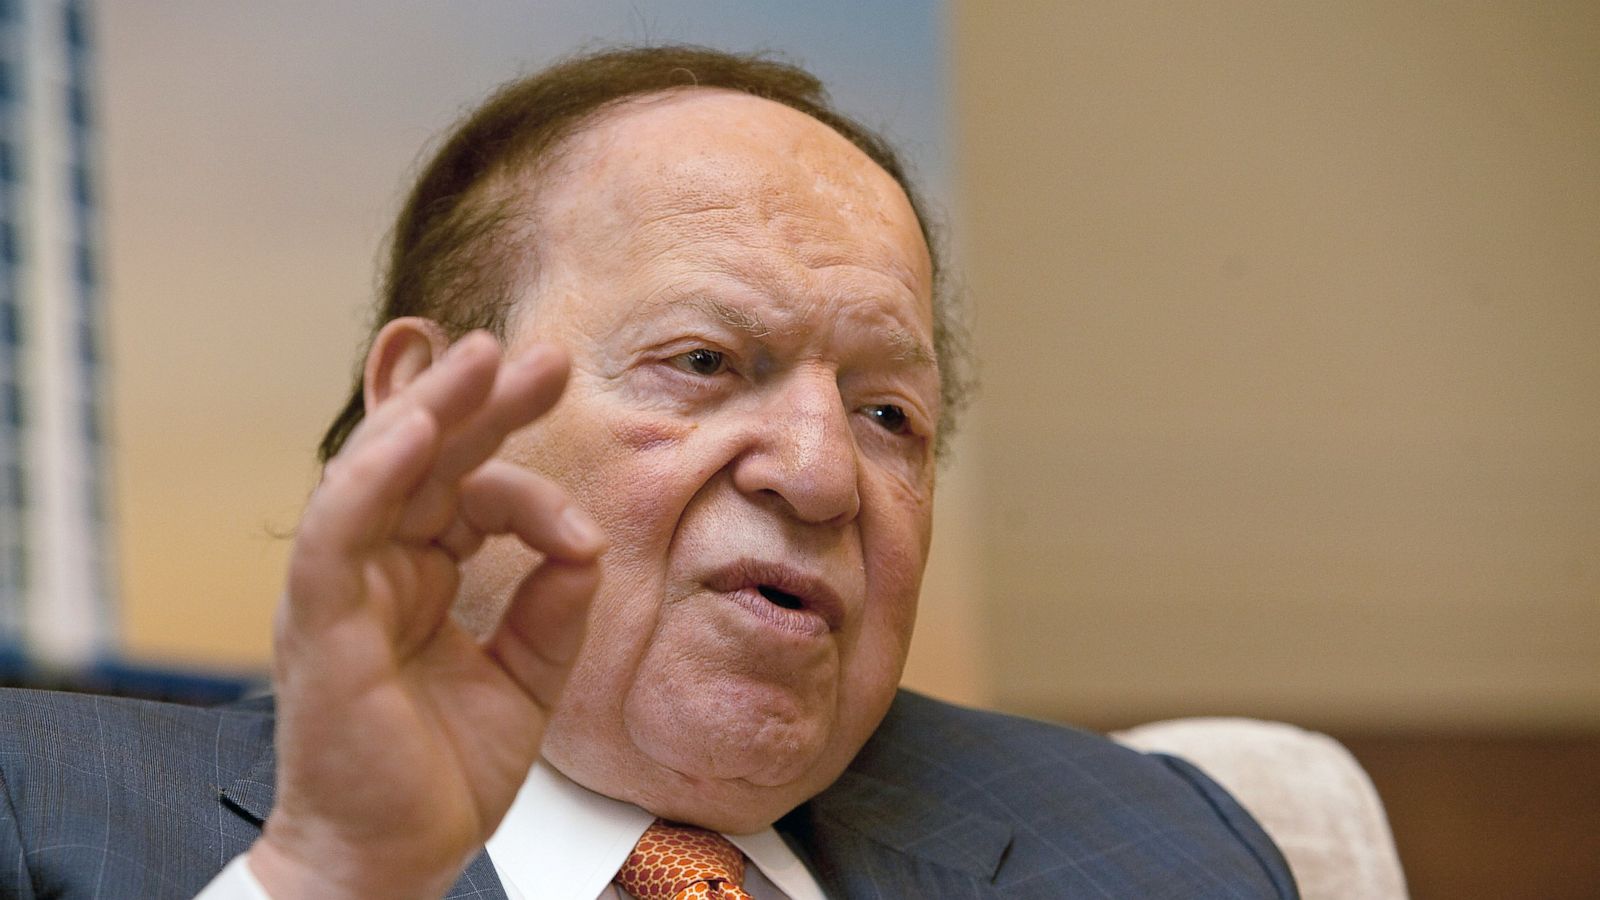 Poker Players, Outraged, Target CEO Adelson Over Internet Gaming Stand